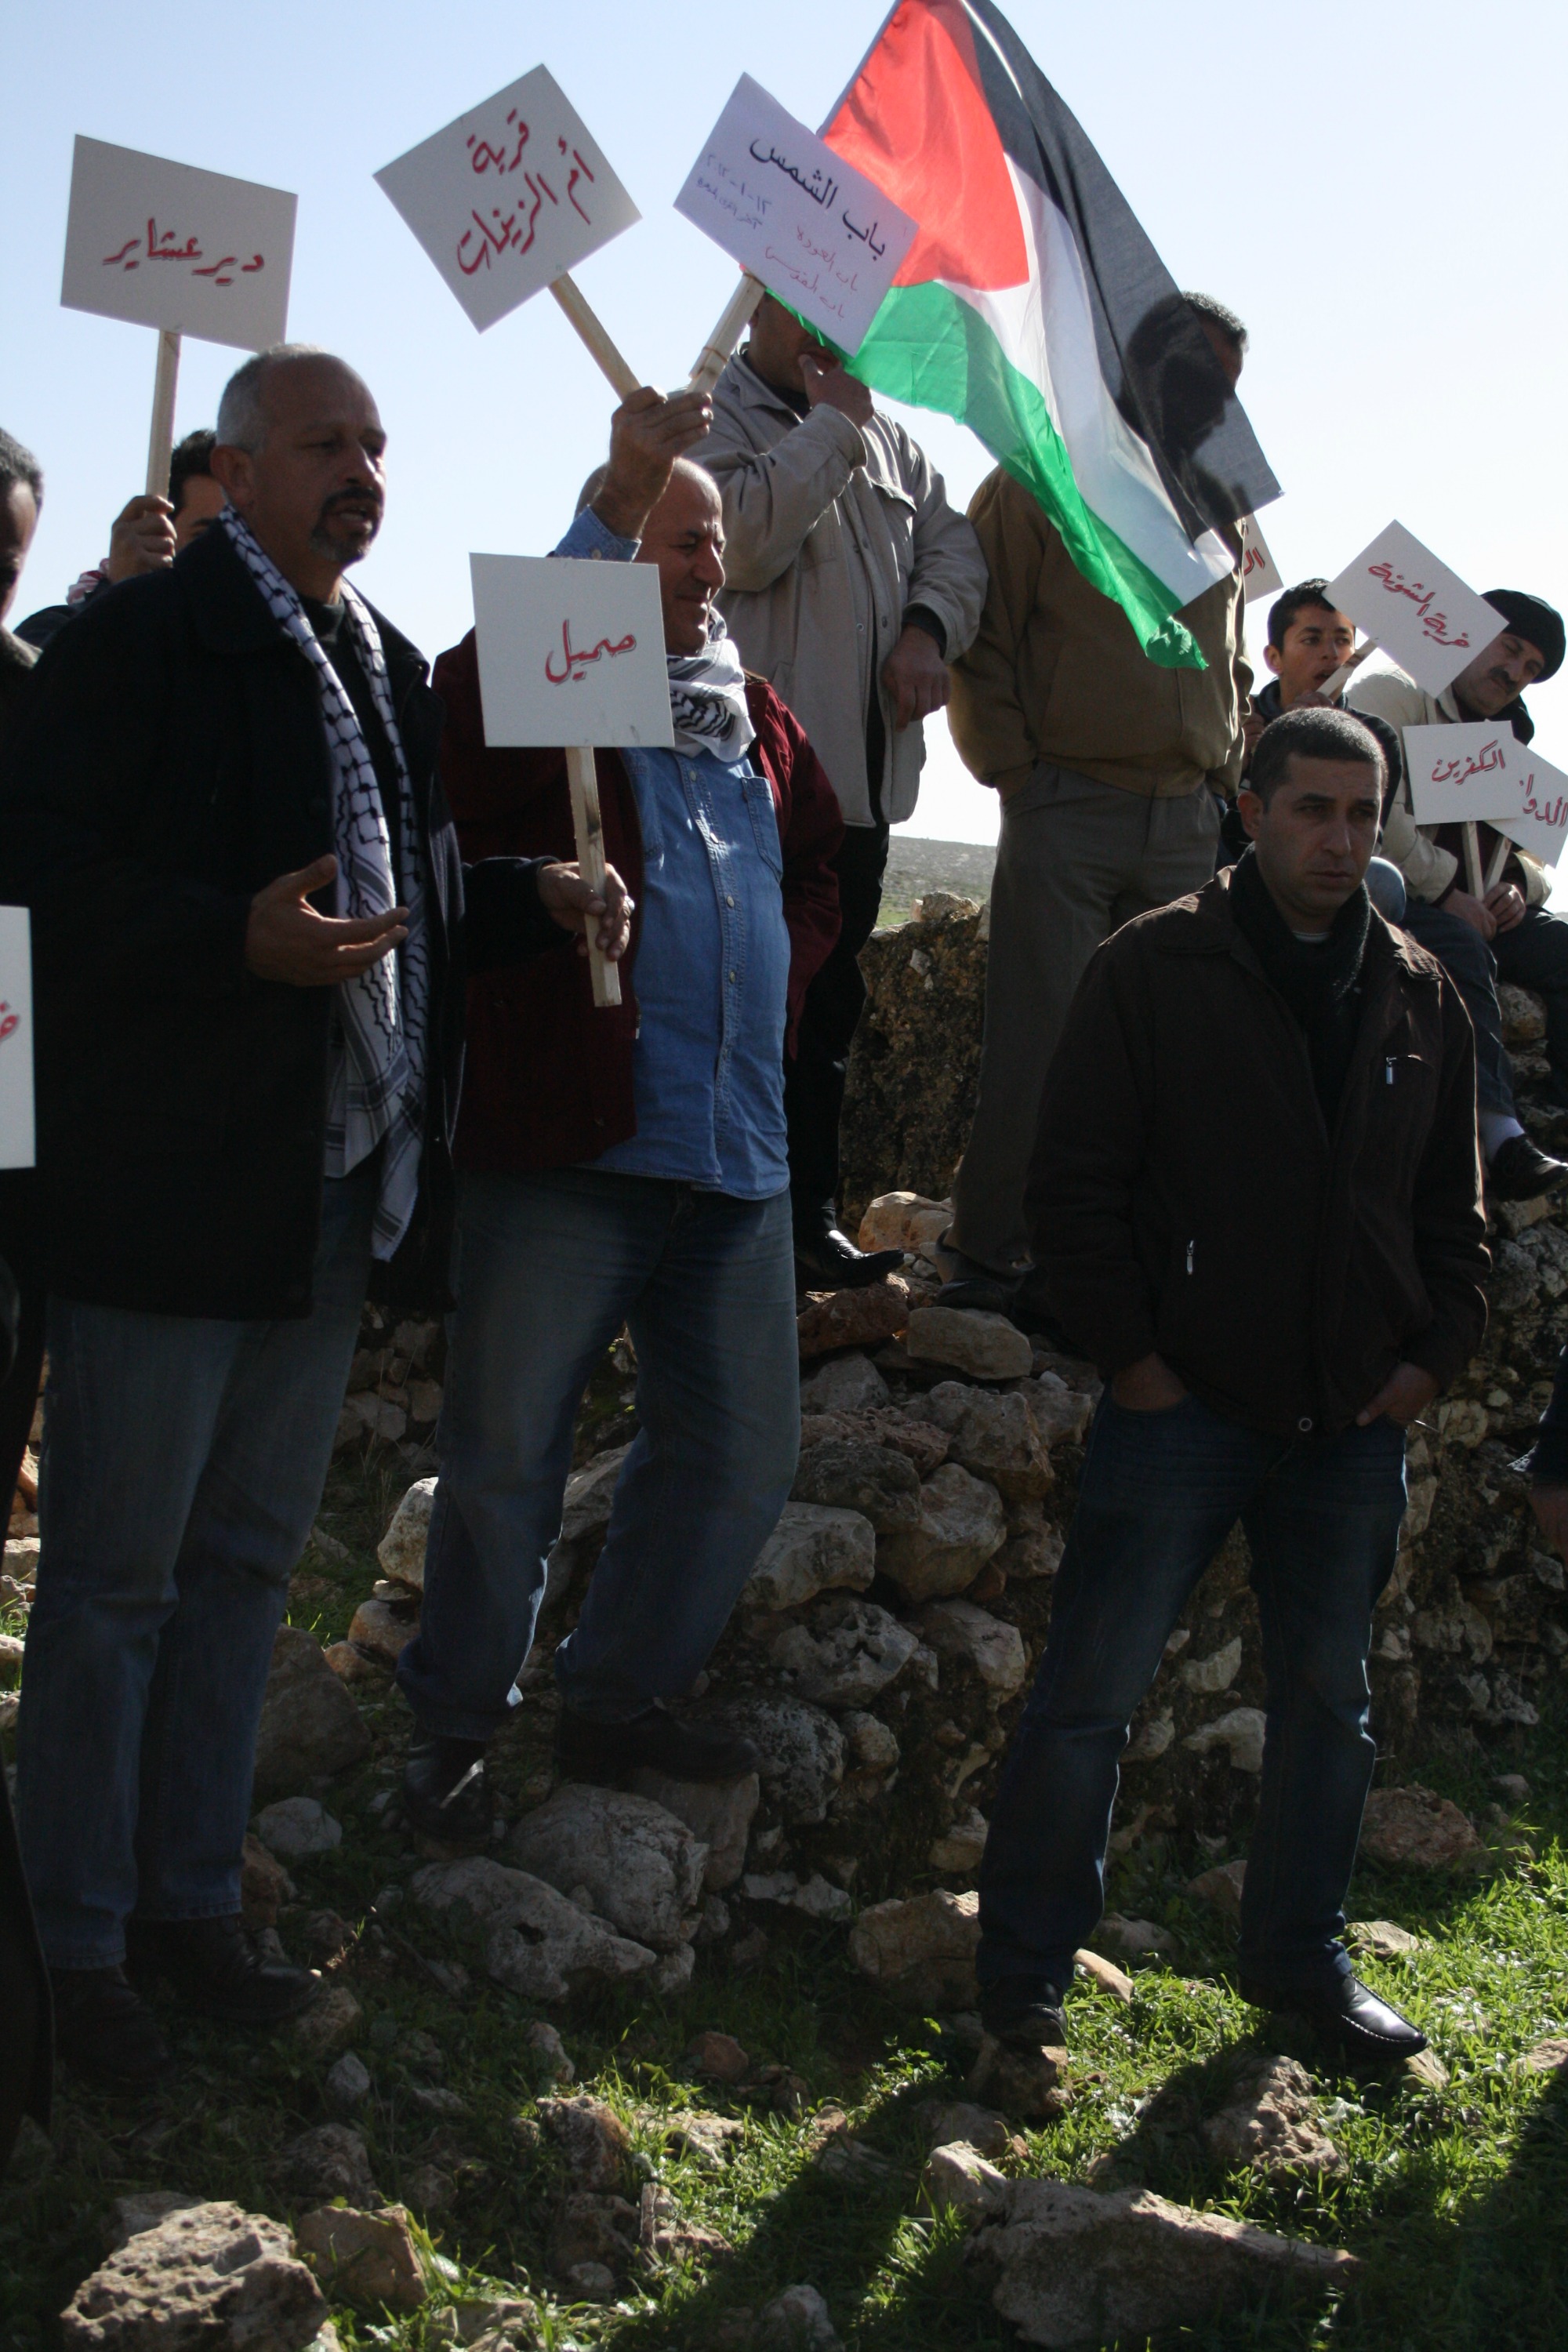 Palestinian movements plant olives in defense of their land against JNF